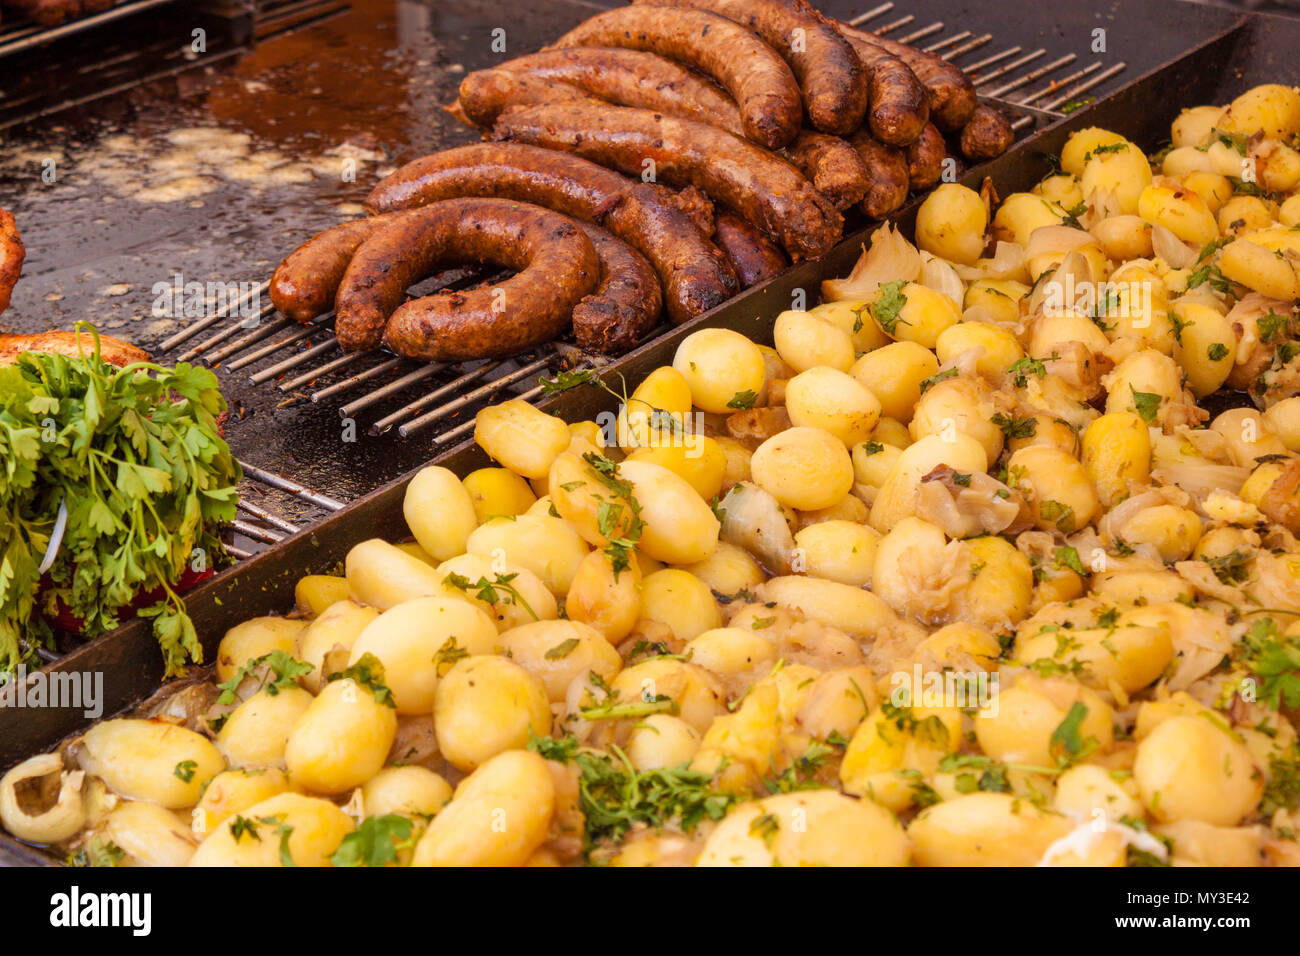 Fried sausages and boiled potatoes with parsley on an outdoor market stall in Budapest, Hungary. Typical european street food. Stock Photo